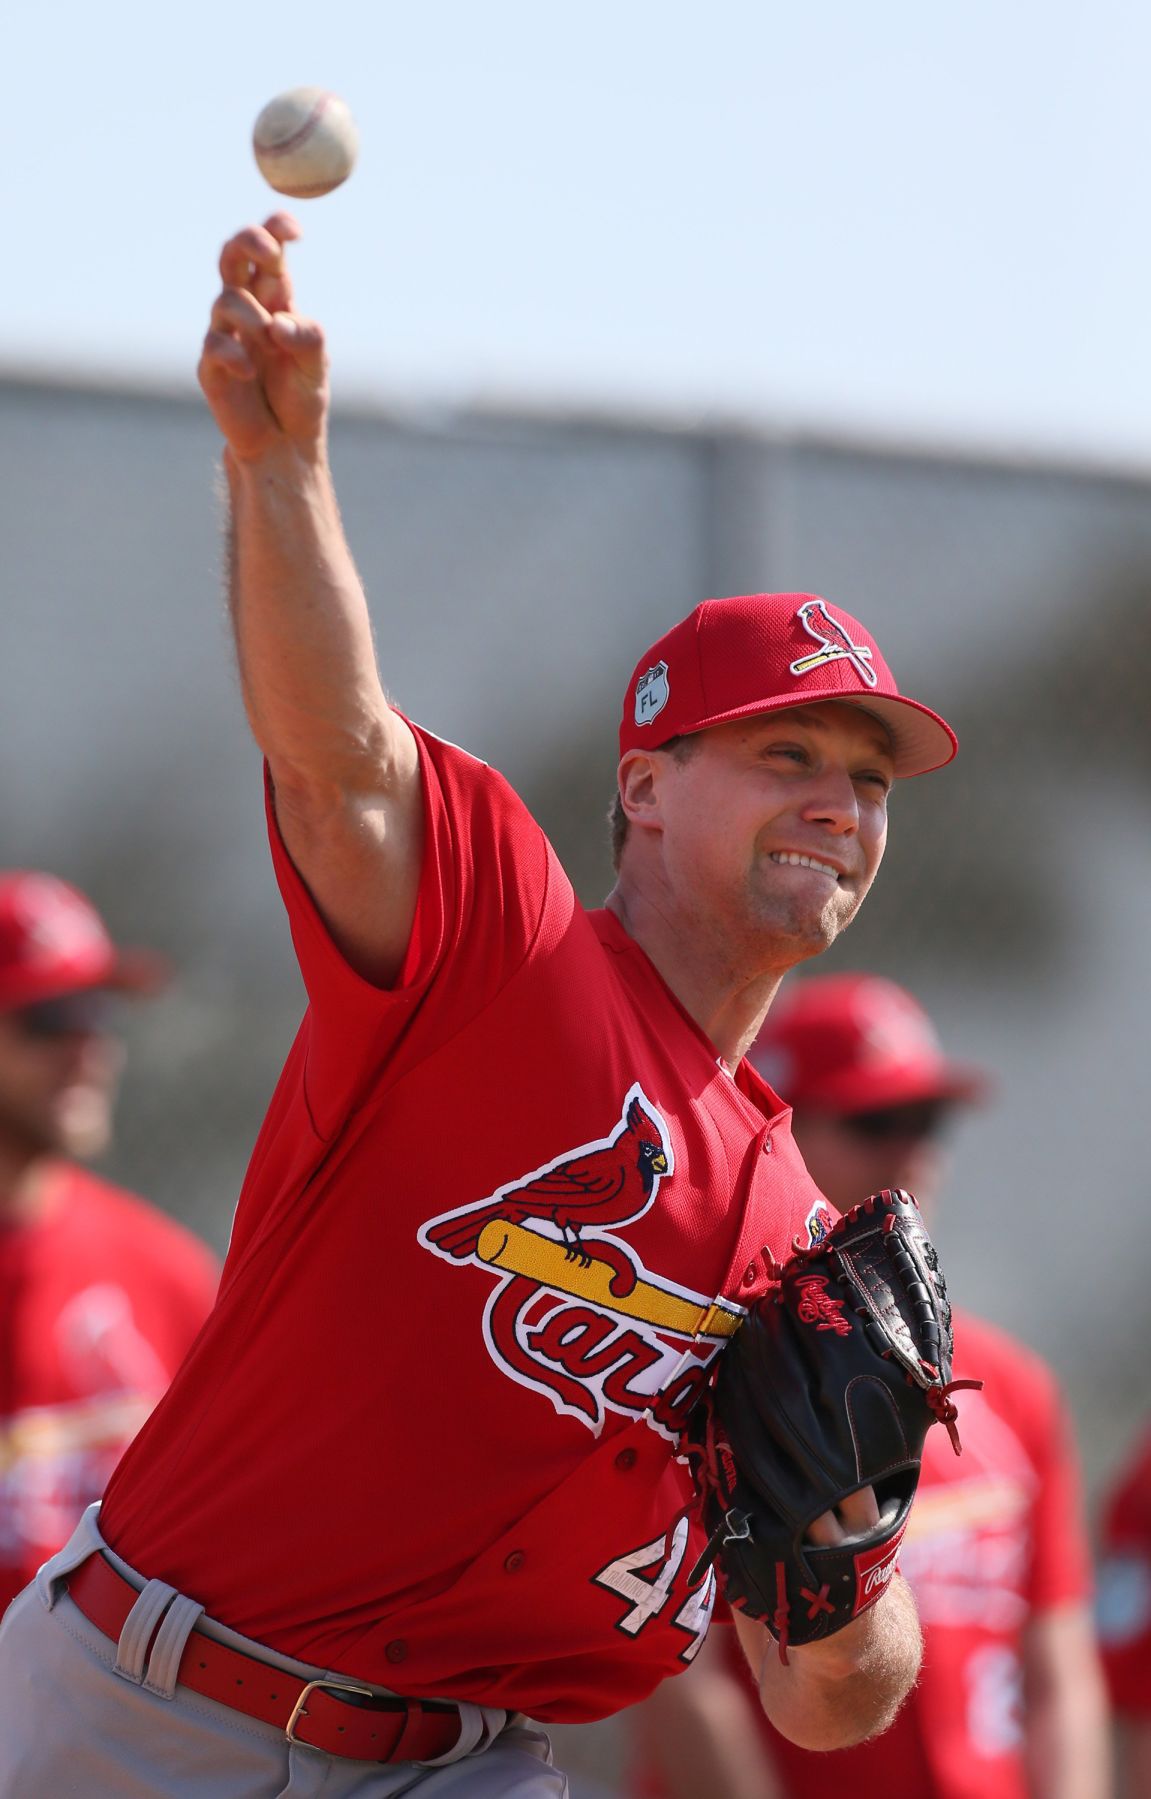 Scenes from the Cardinals Spring Training on Wednesday, Feb. 15 | St. Louis Cardinals | www.semadata.org